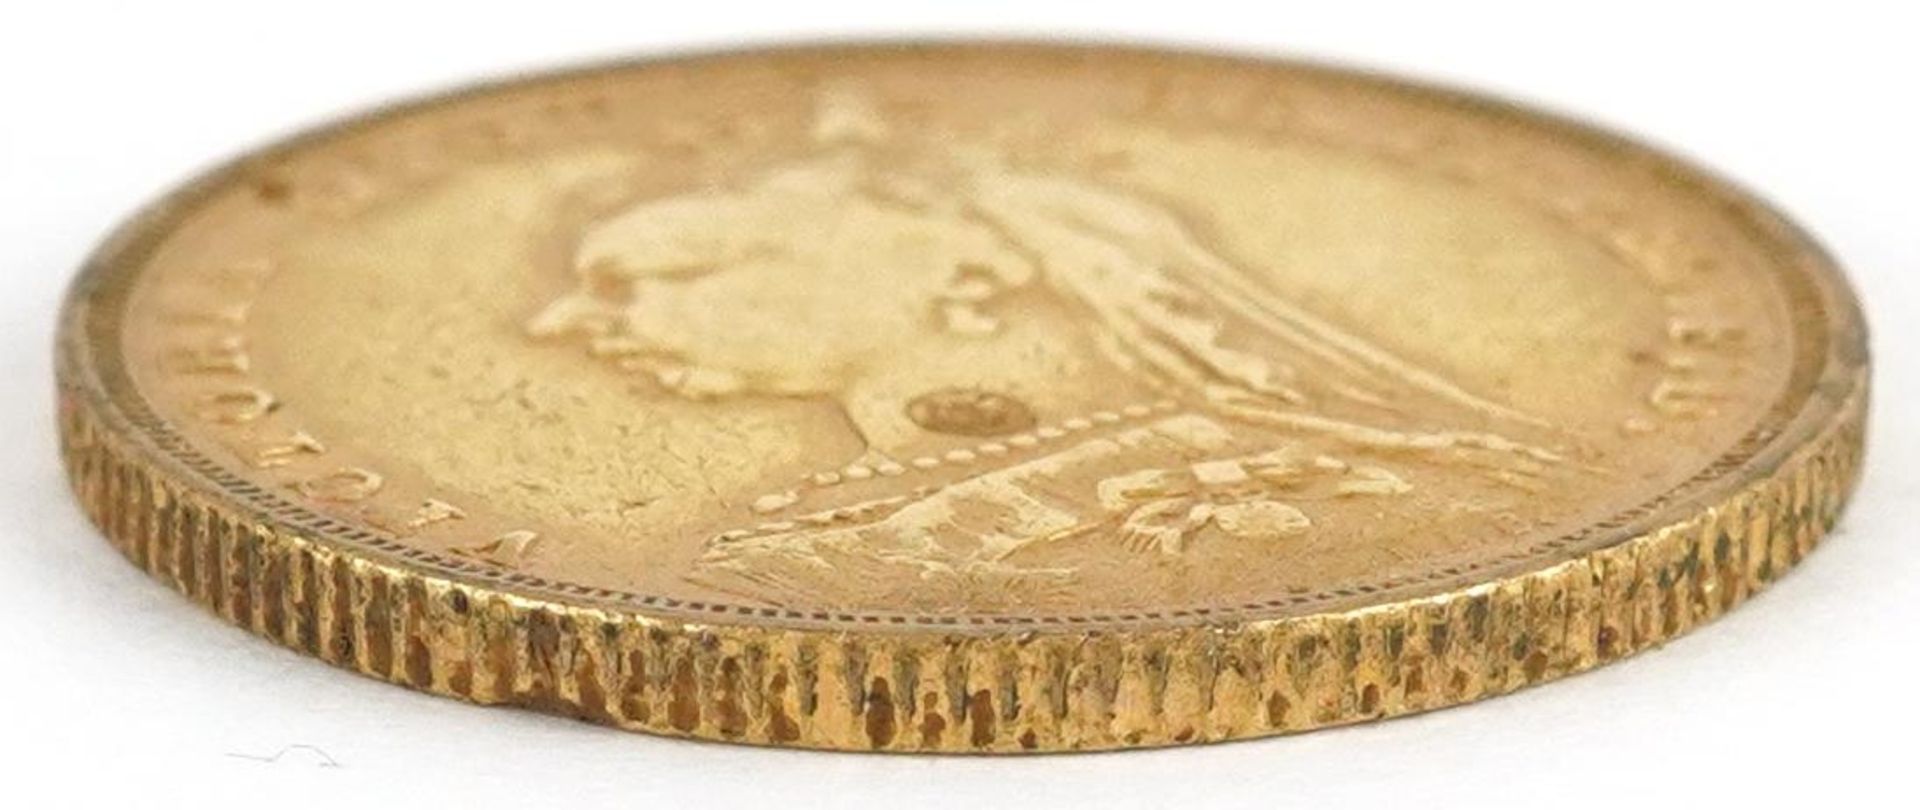 Queen Victoria Jubilee head 1893 gold sovereign, Sydney Mint - Image 3 of 3